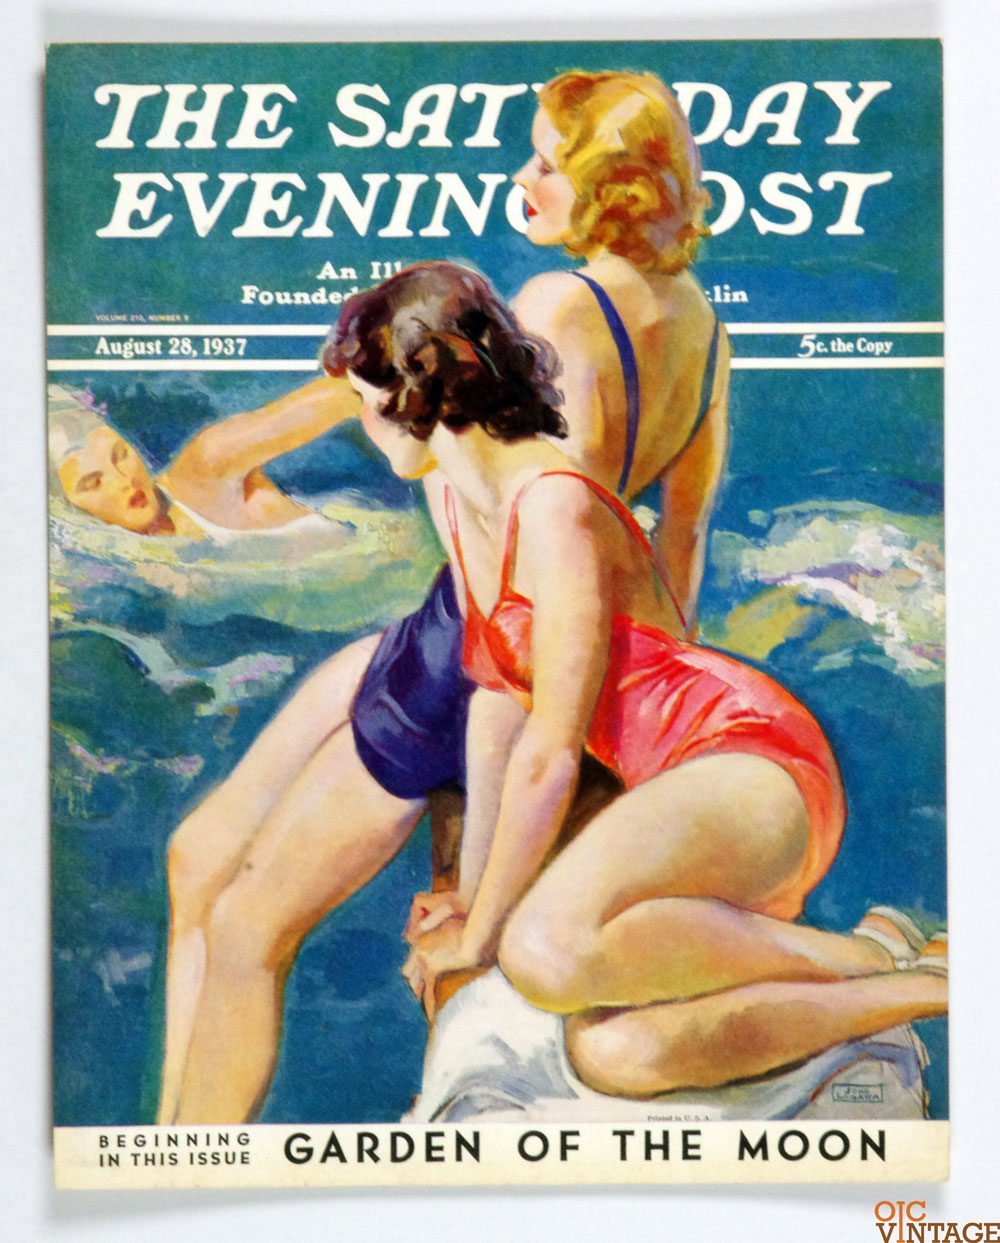 The Saturday Evening Post Poster Flat 1937 Aug 26 At The Pool